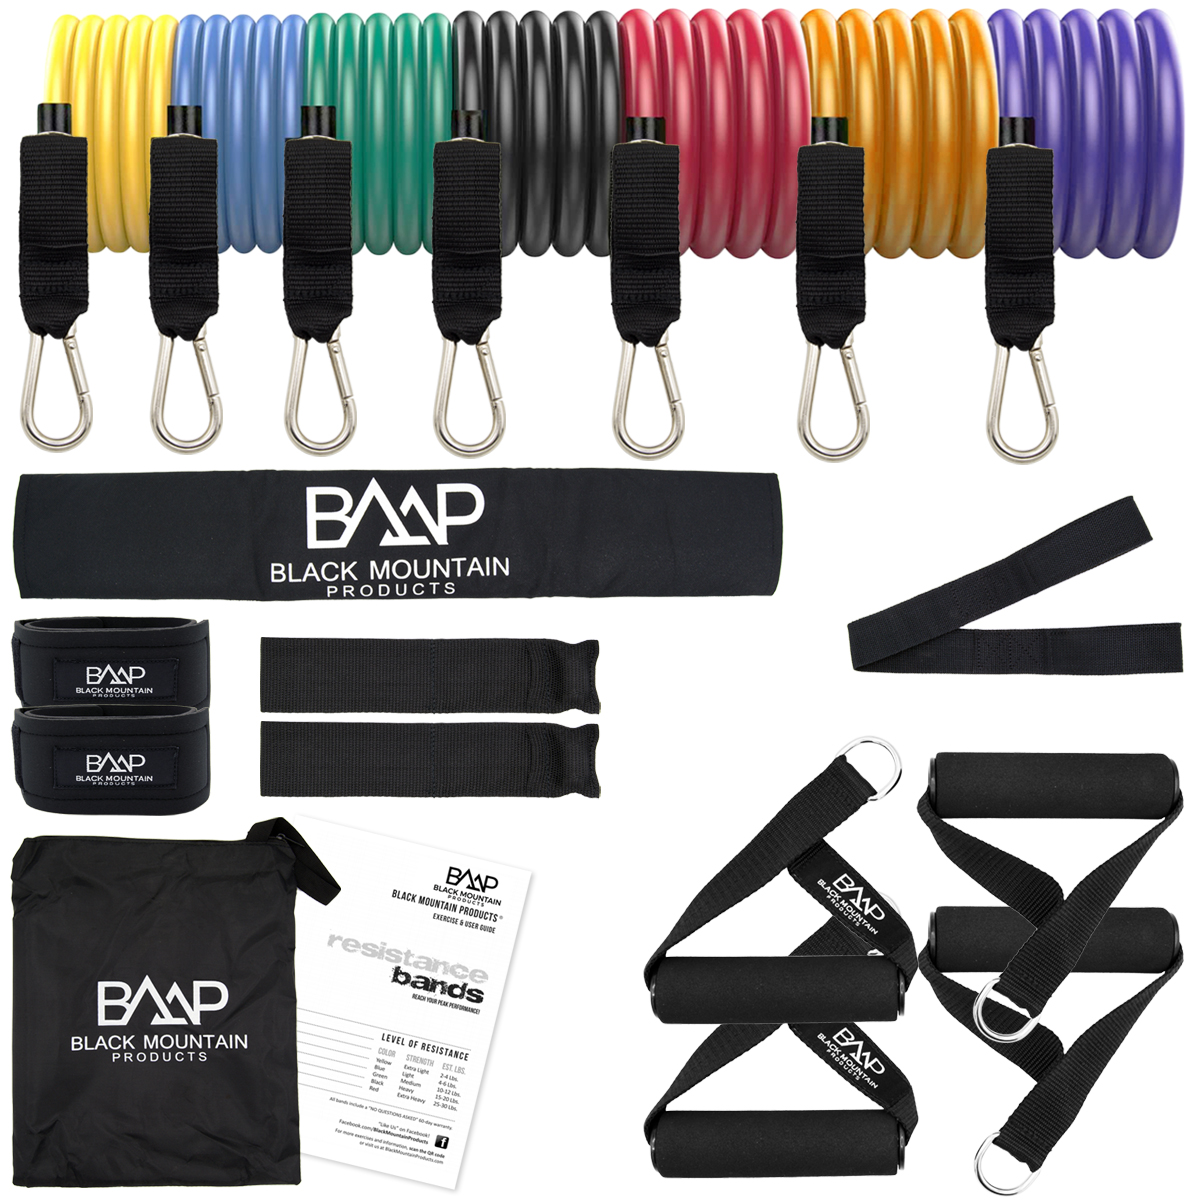 Stackable Resistance Band Set for sale online ZQB-17010 Black Mountain Products 